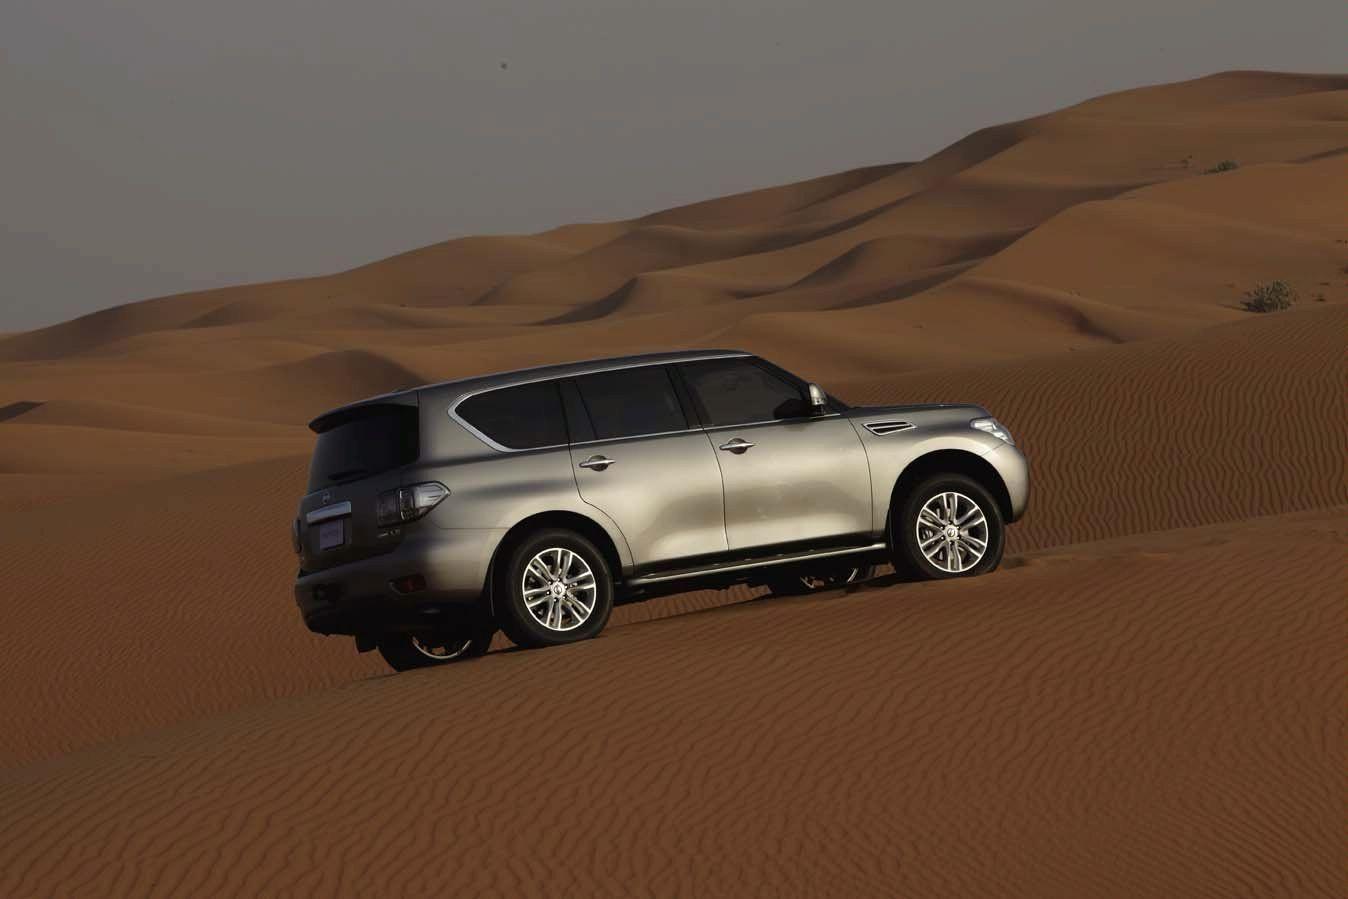 Nissan Patrol 2010 photo 56292 picture at high resolution